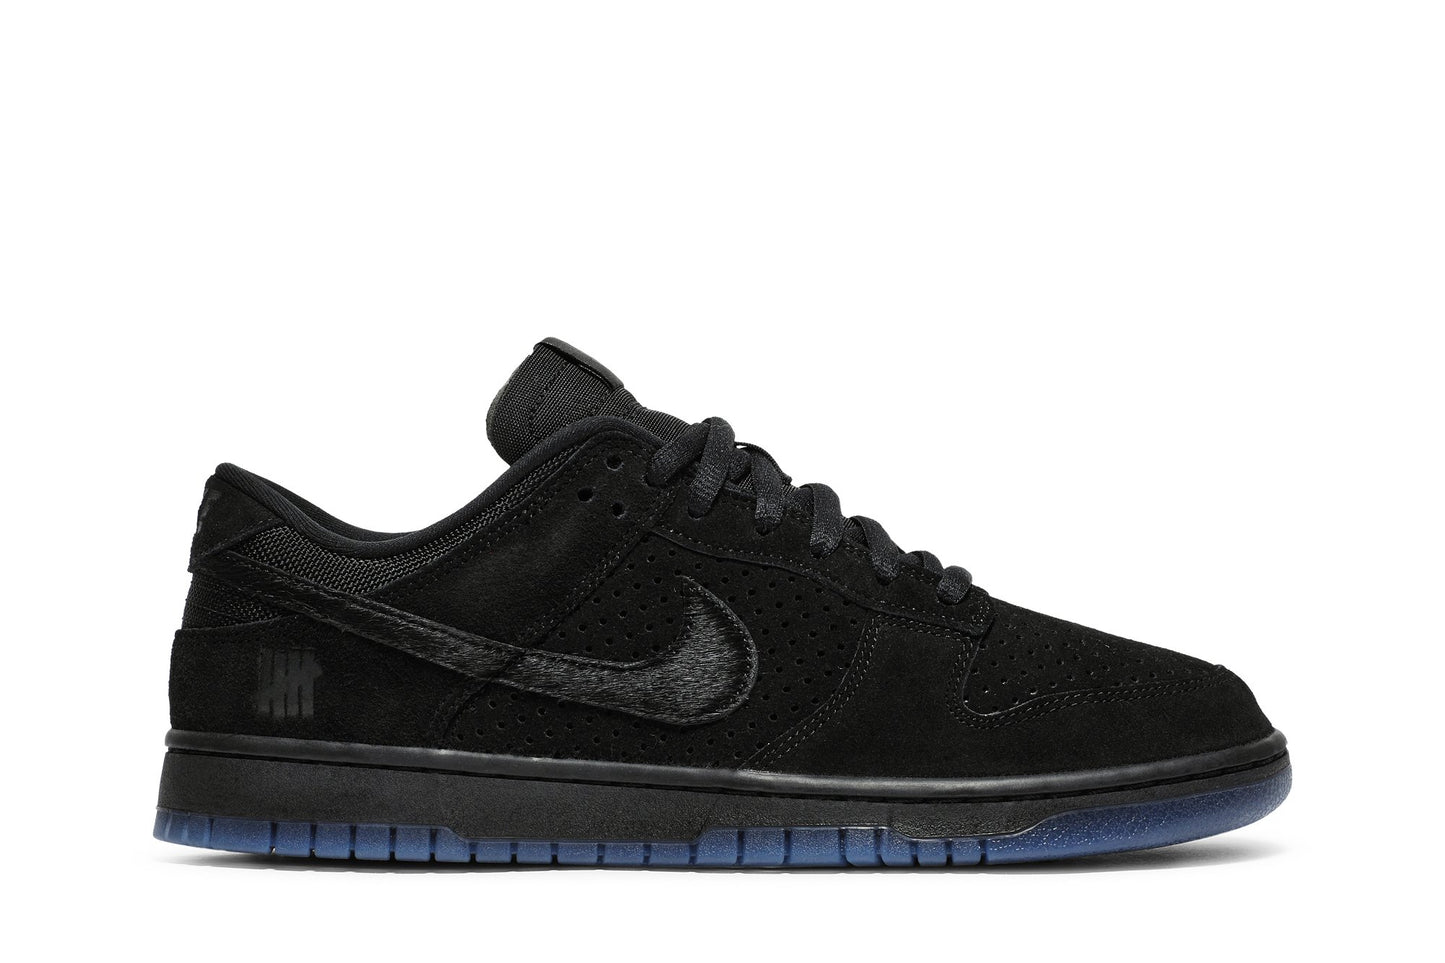 Undefeated x Dunk Low 'Dunk vs AF1' DO9329-001